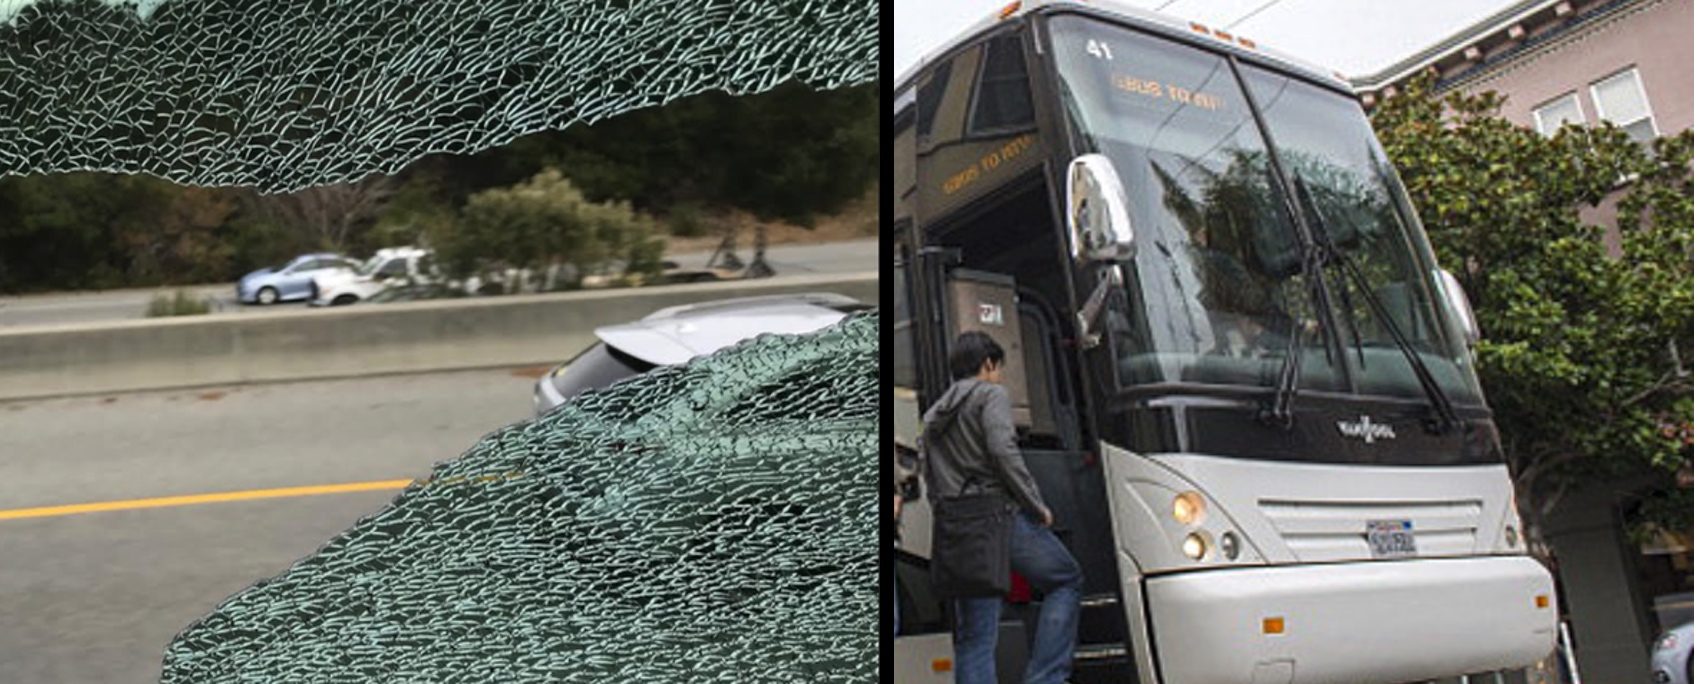 Apple Employee Shuttles are Being Attacked During Work Commute to Campus